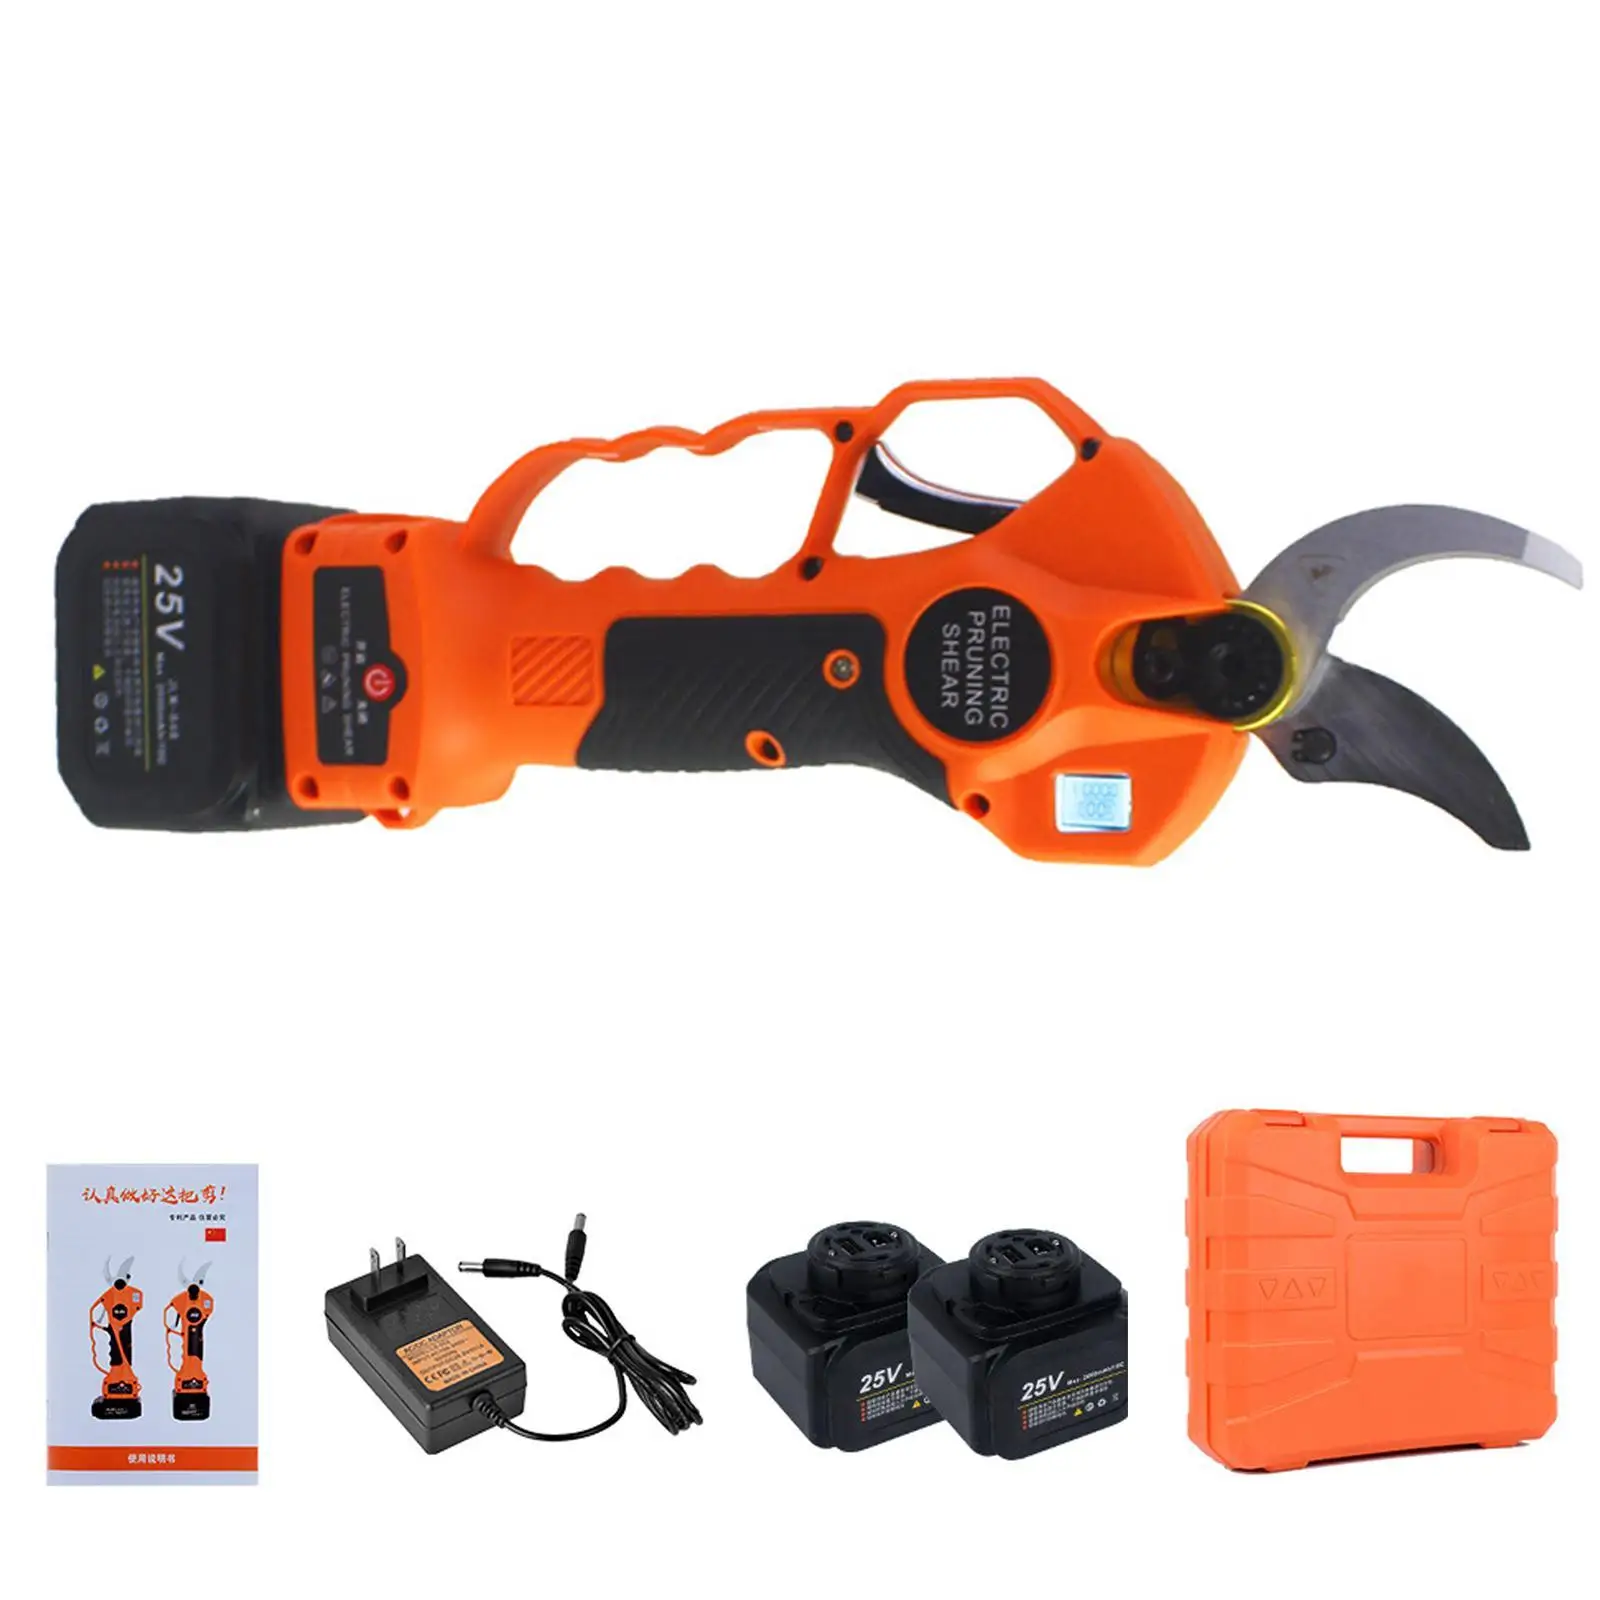 25V Portable Cordless Electric Pruning Shears Rechargeable Battery Powered Tree Branch Pruner Garden Clippers 40mm Cutting Tools